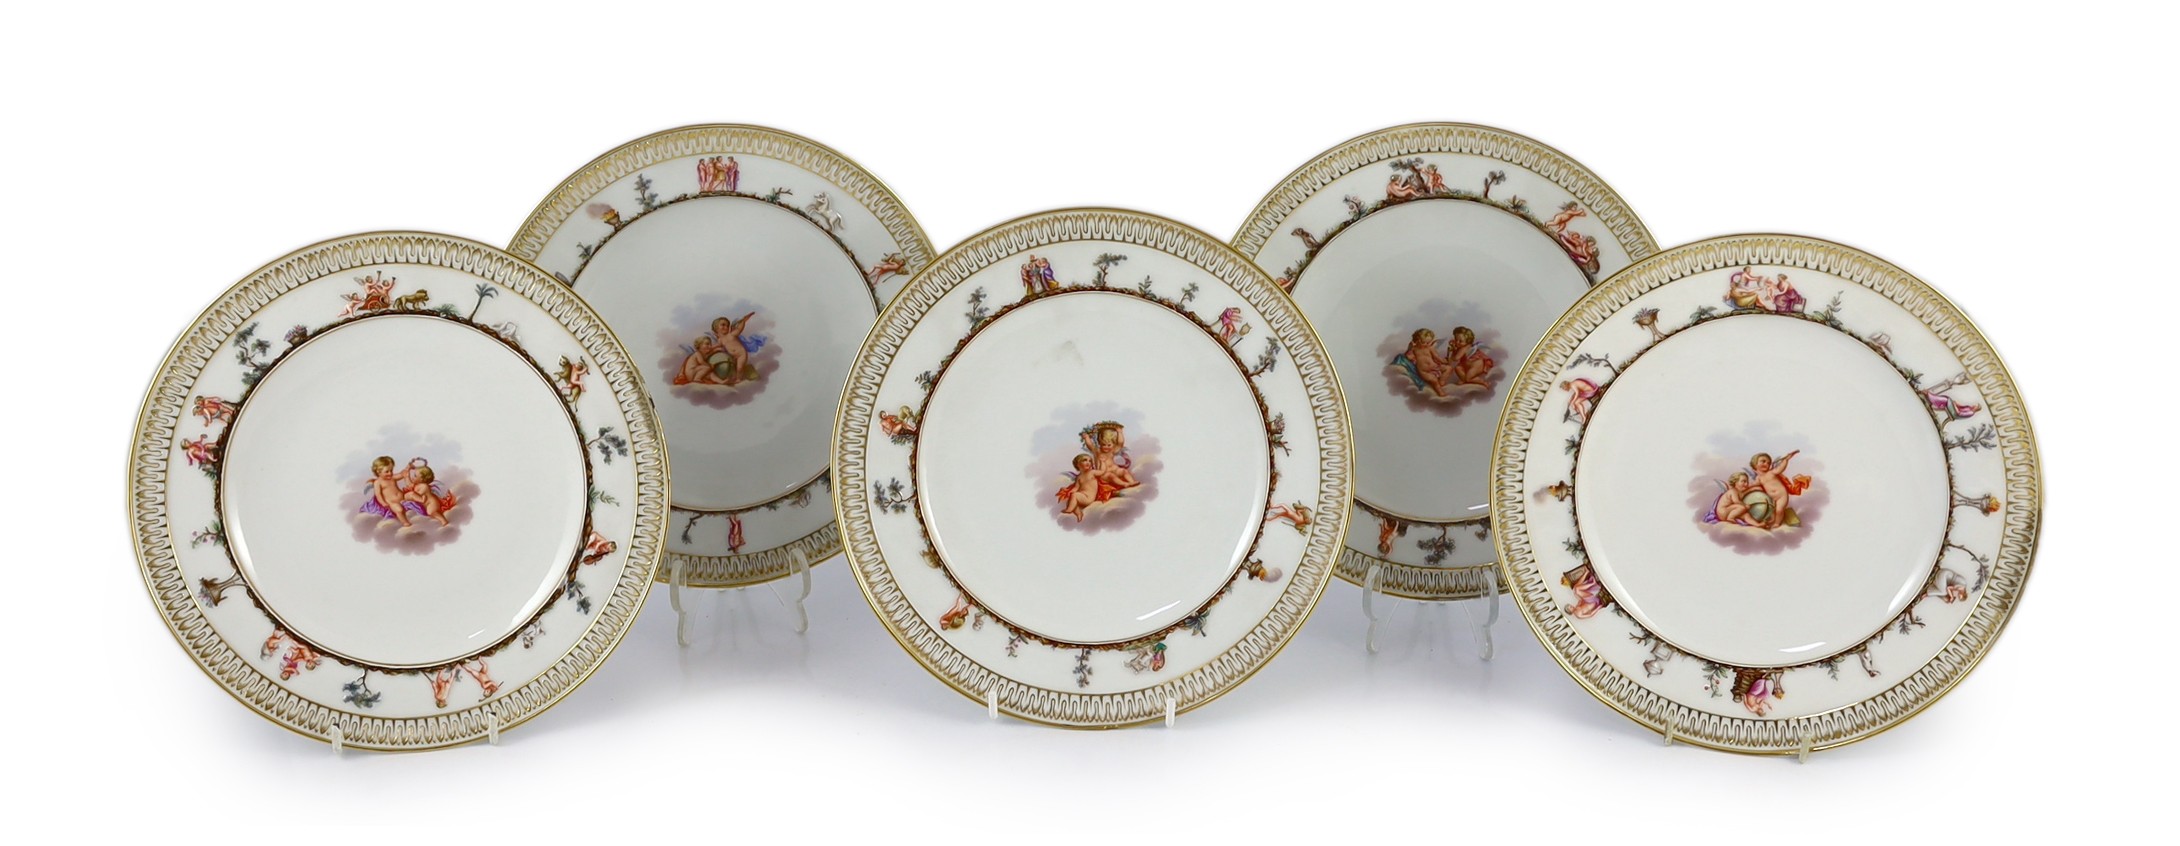 A set of five Meissen Capo di Monte style plates, 19th century, each painted to the centre with